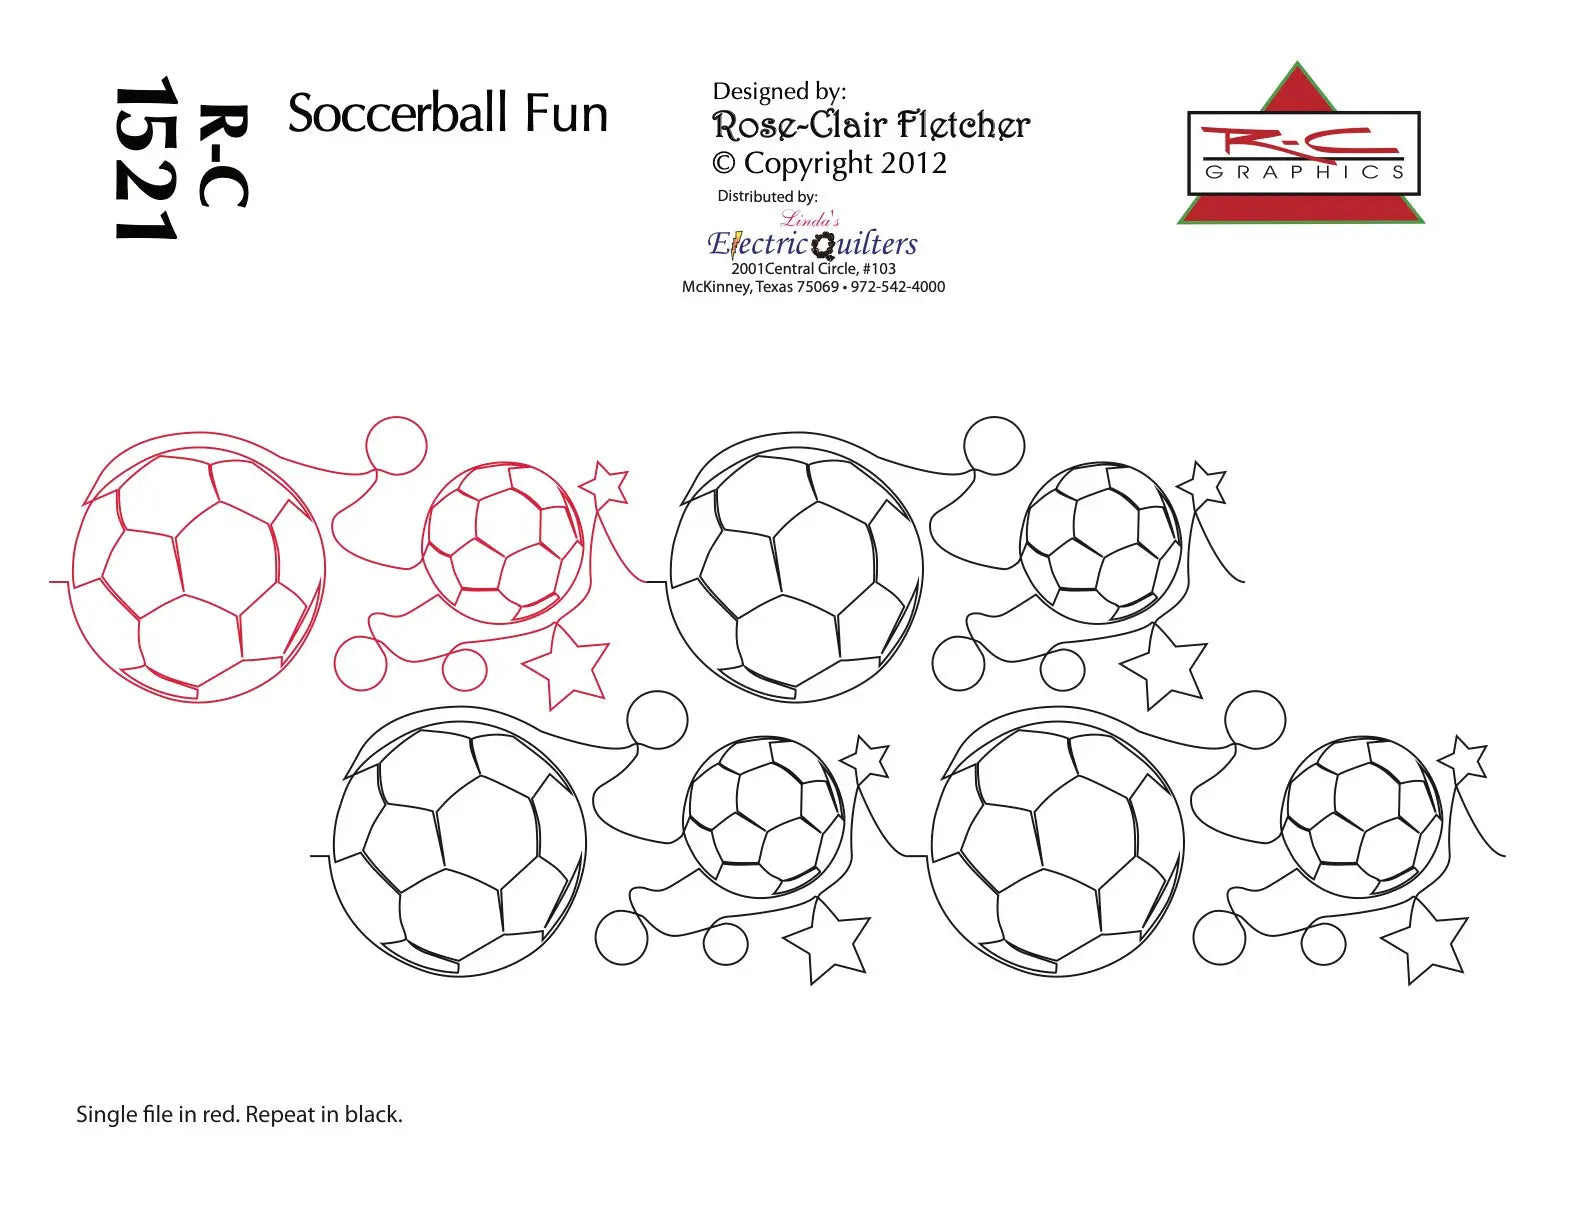 1521 Soccerball Fun Pantograph by Rose-Clair Fletcher - Linda's Electric Quilters